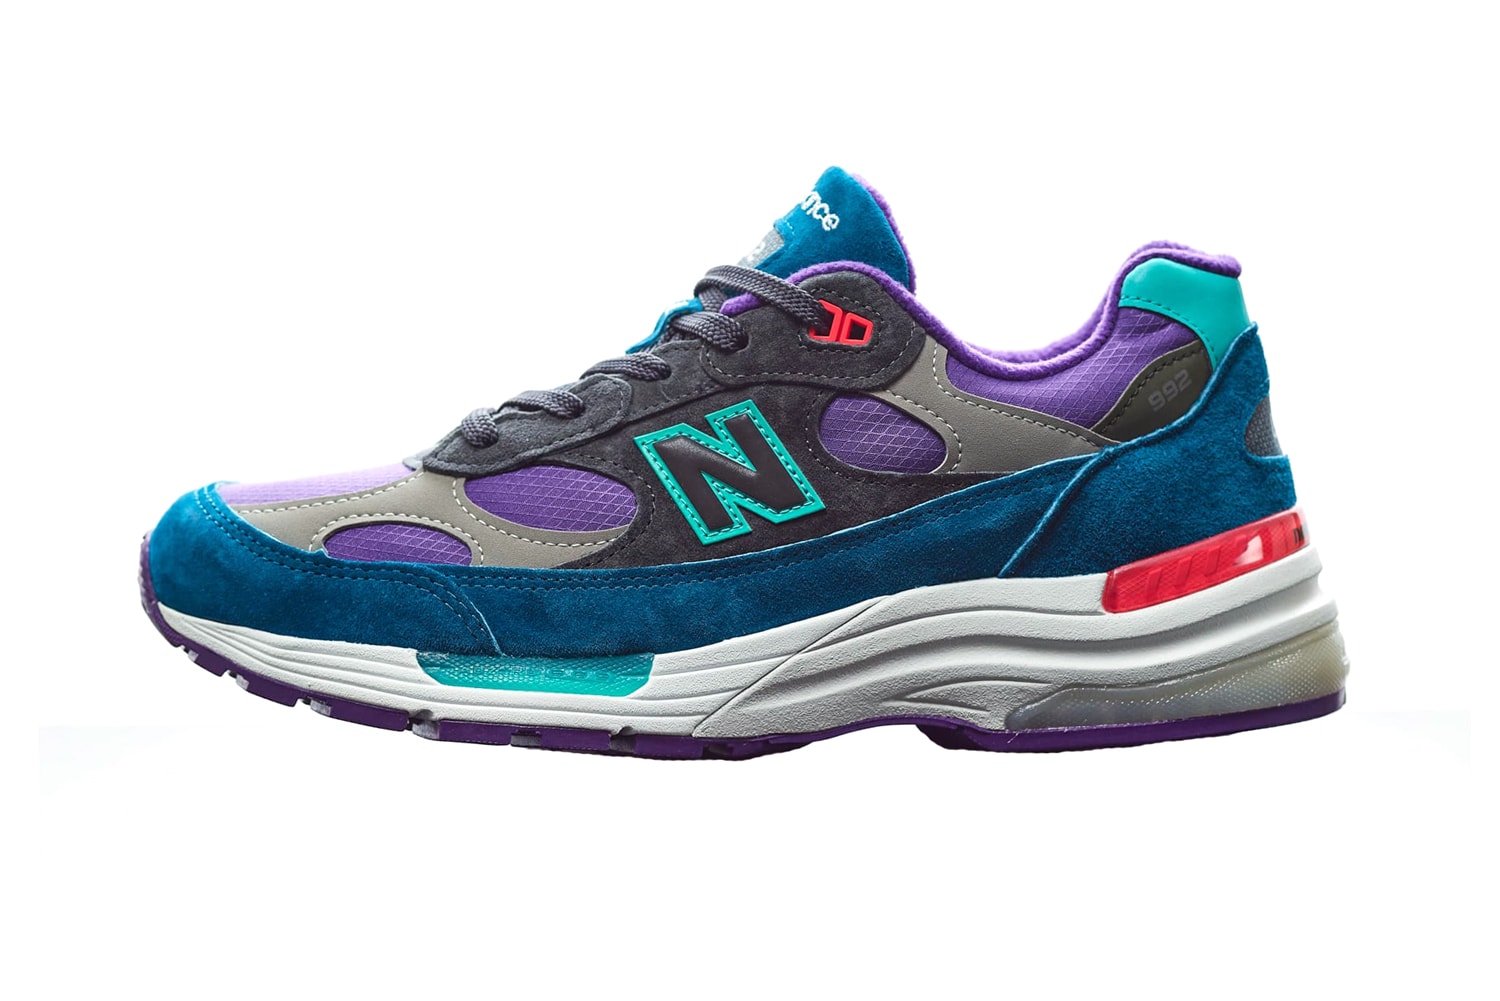 billys tokyo new balance 992 collaboration footwear sneakers shoes